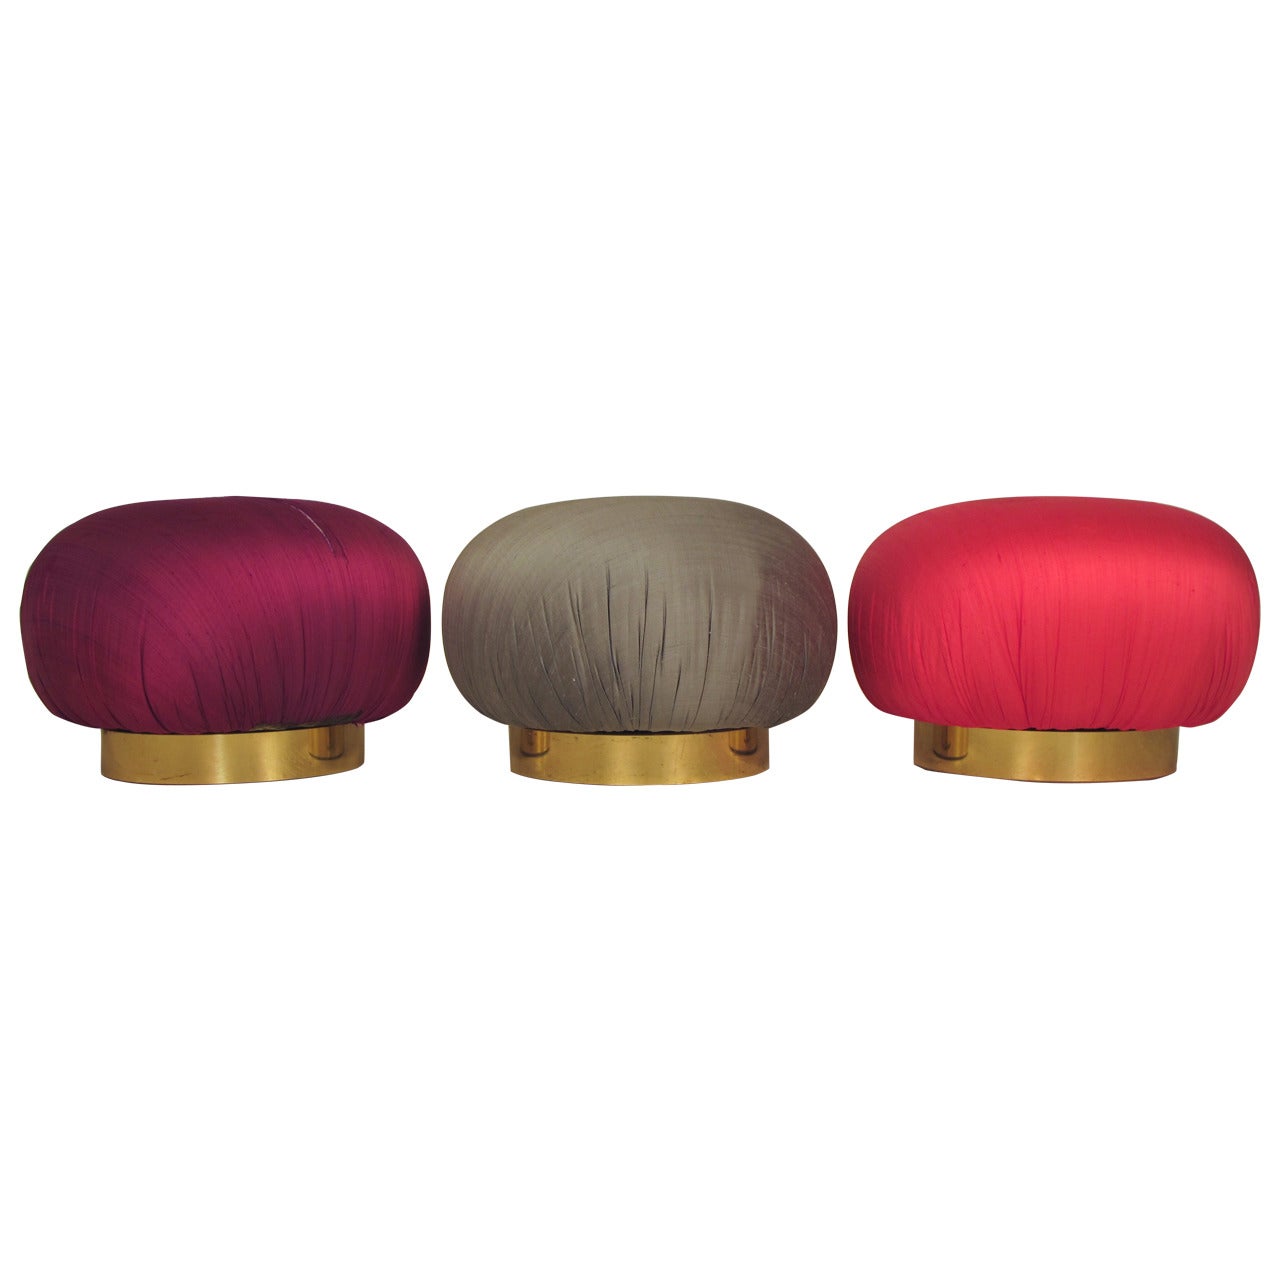 Large Rare Pouf Stools on Brass Swivel Bases by Adrian Pearsall, Comfort Designs